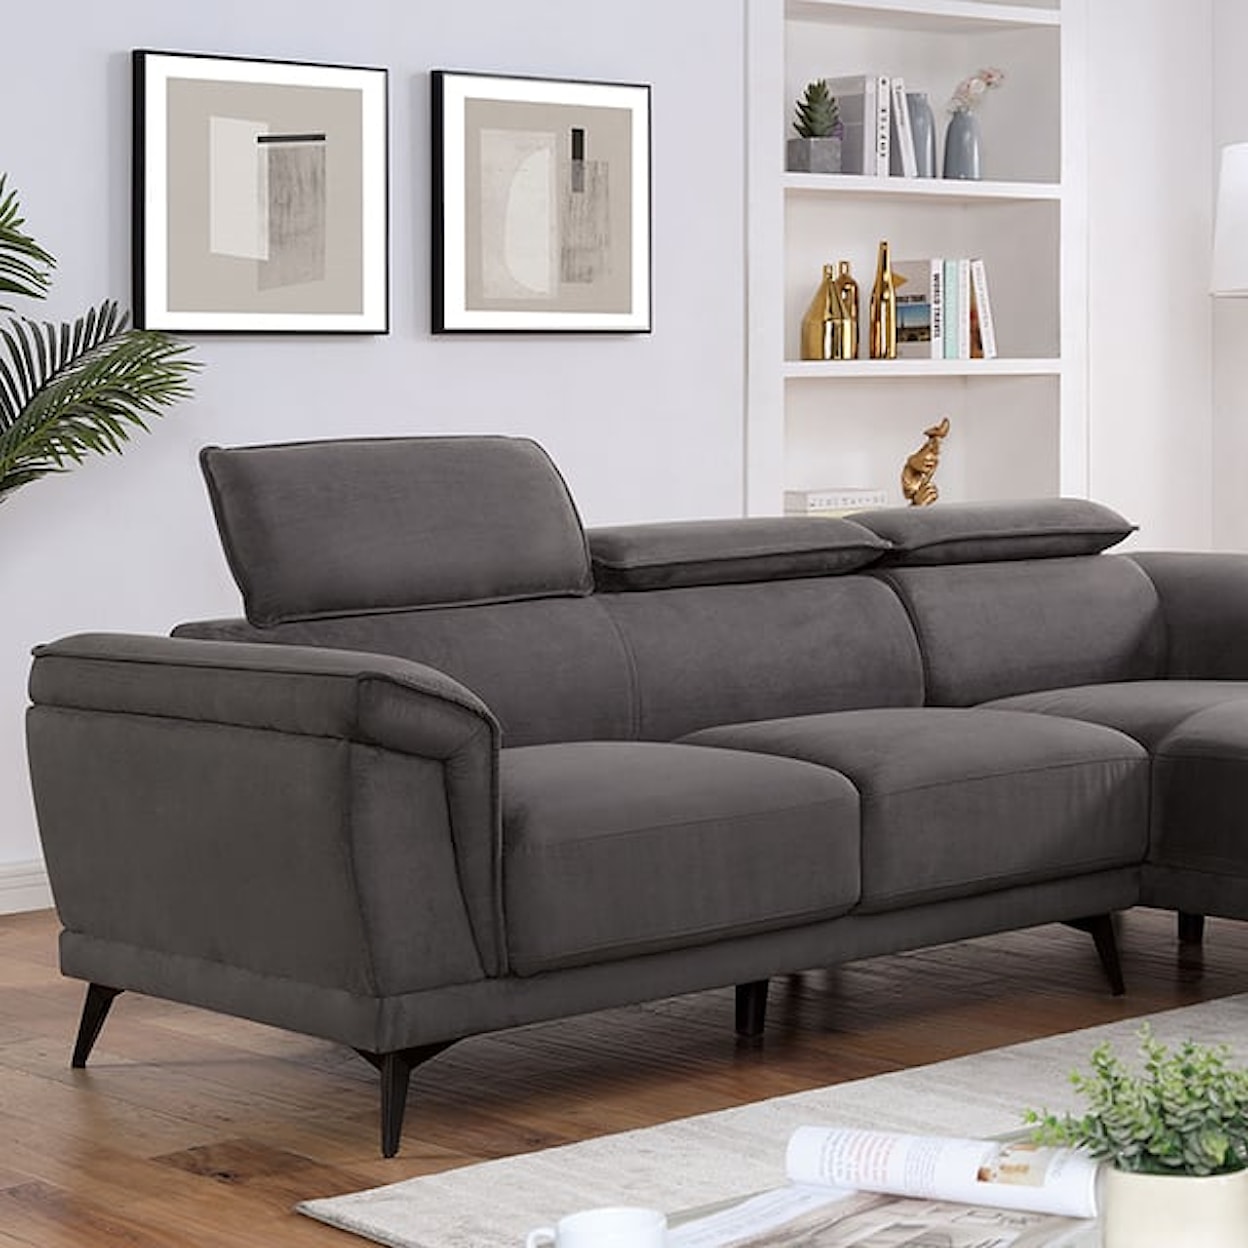 Furniture of America Napanee Sectional with Adjustable Headrests